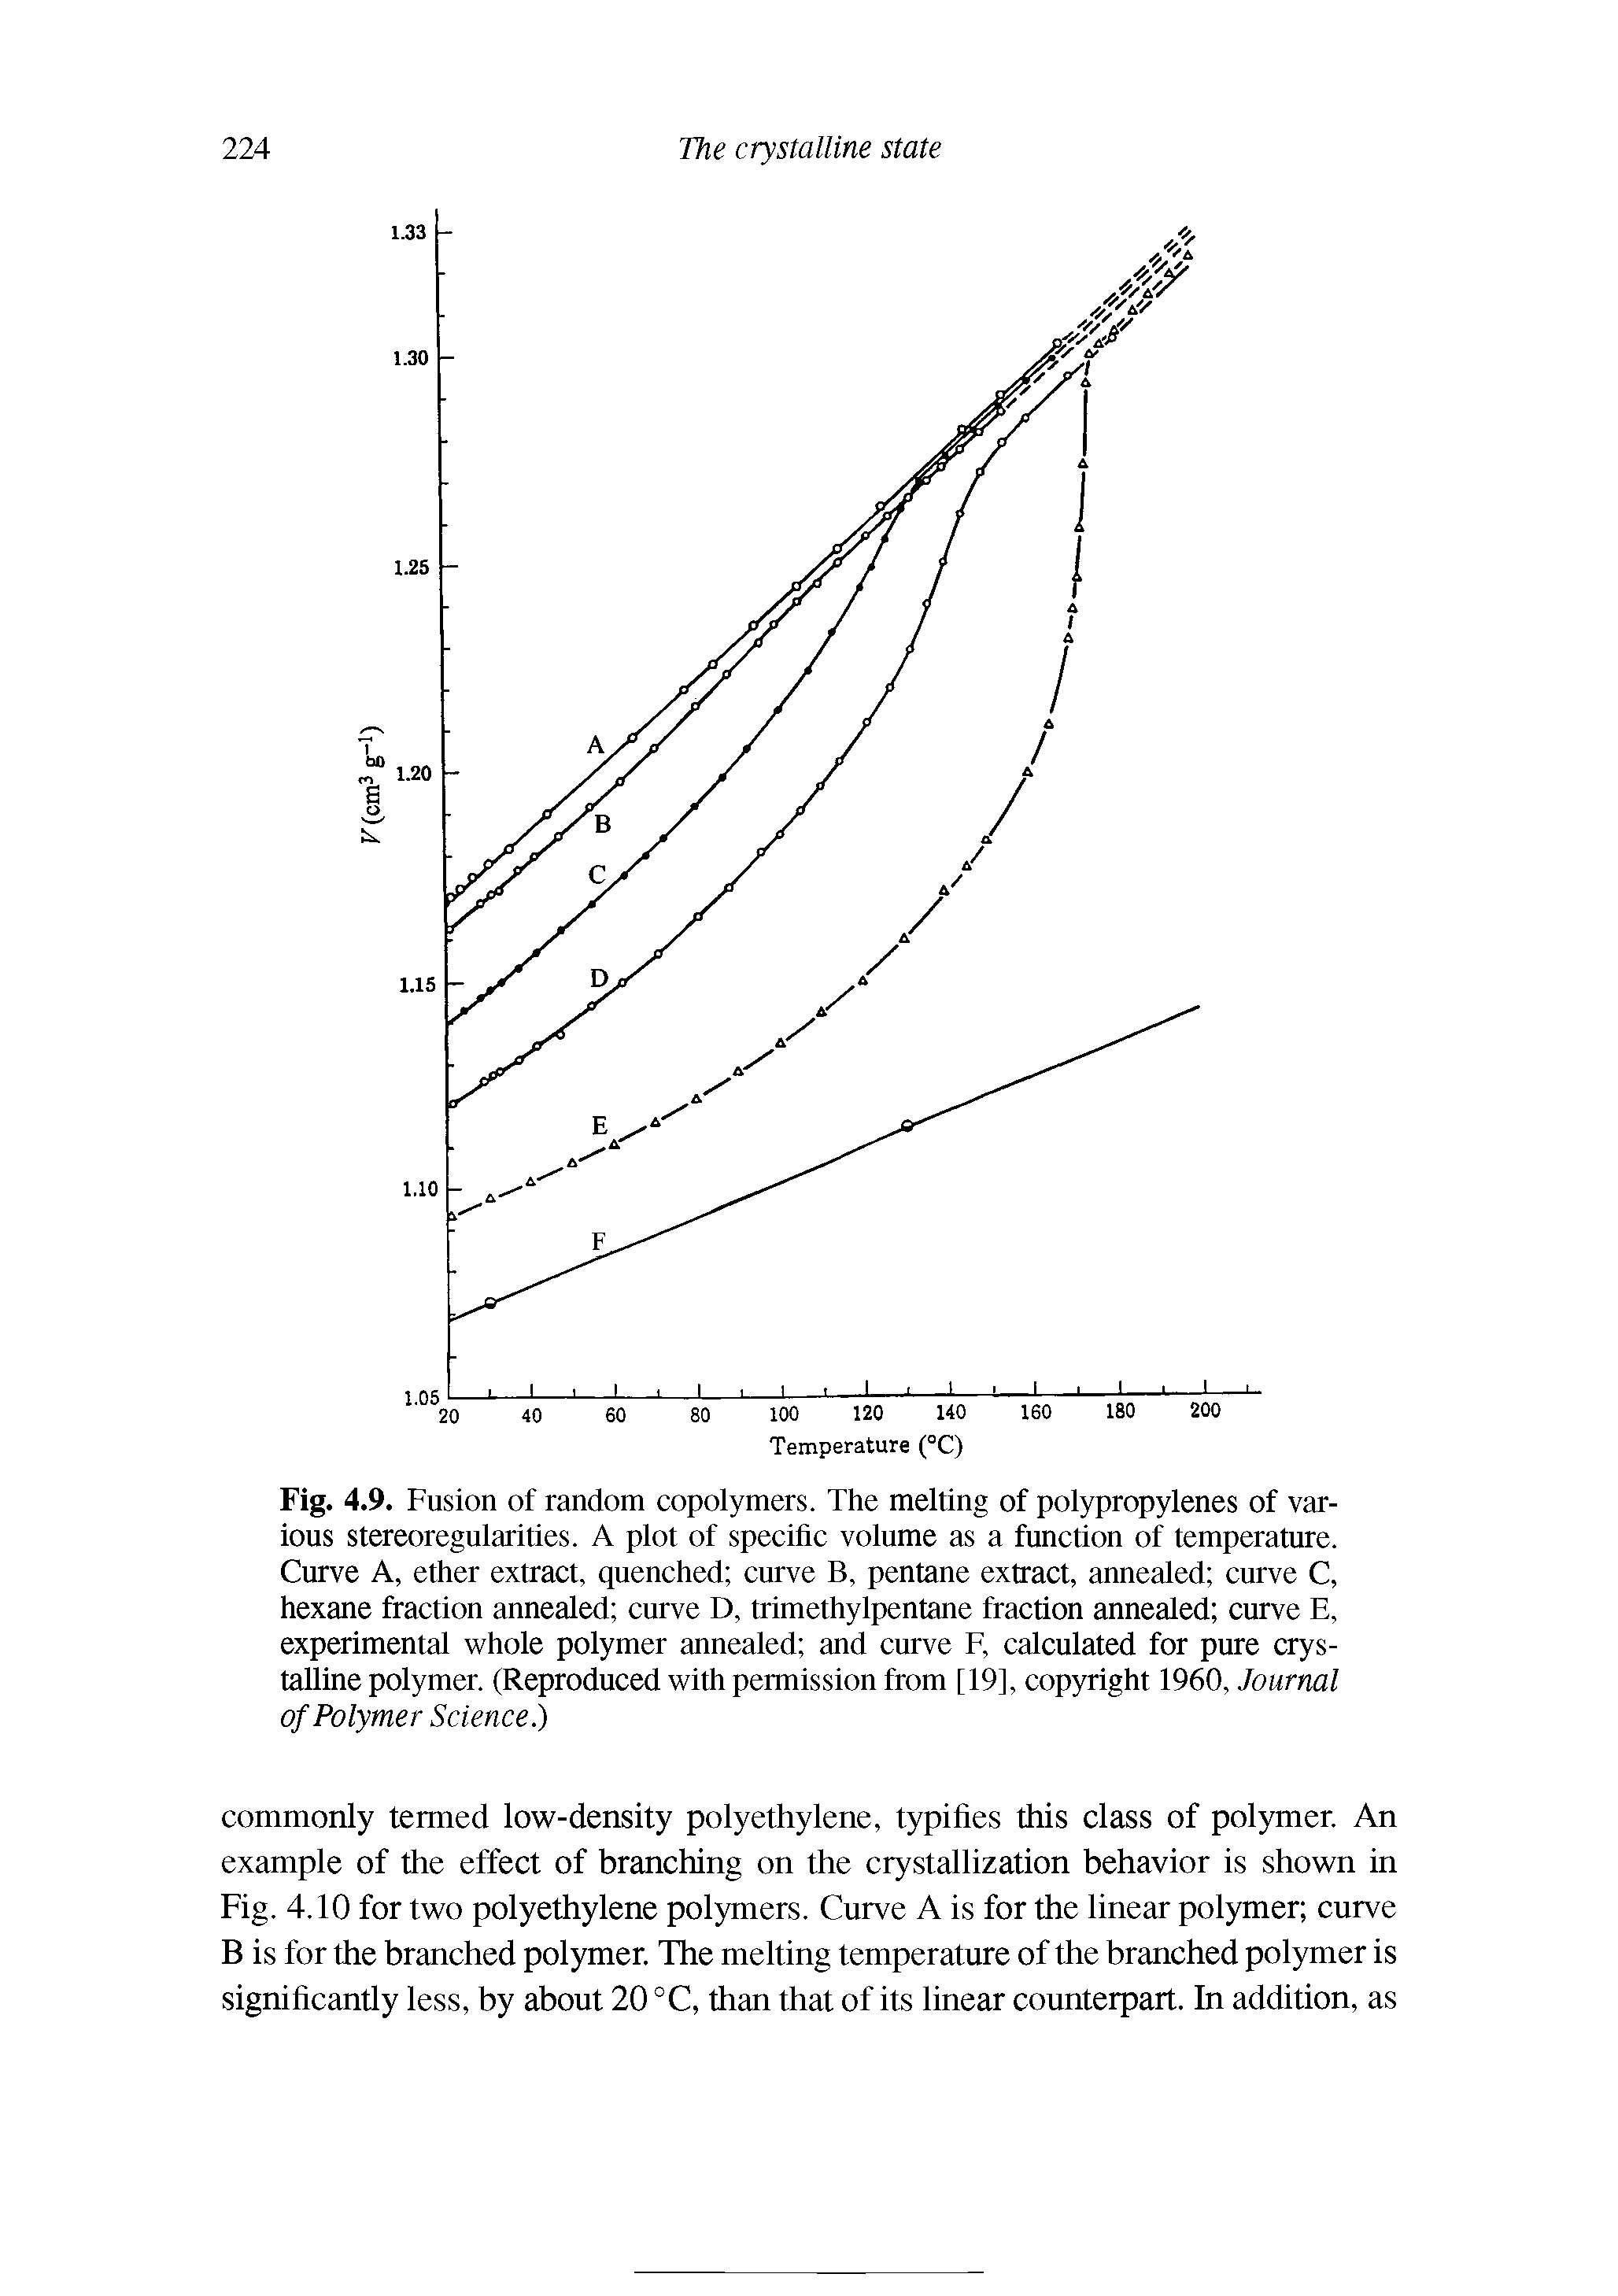 Fig. 4.9. Fusion of random copolymers. The melting of polypropylenes of various stereoregularities. A plot of specific volume as a function of temperature. Curve A, ether extract, quenched curve B, pentane extract, annealed curve C, hexane fraction annealed curve D, trimethylpentane fraction annealed curve E, experimental whole polymer annealed and curve F, calculated for pure crystalline polymer. (Reproduced with permission from [19], copyright 1960, Journal of Polymer Science.)...